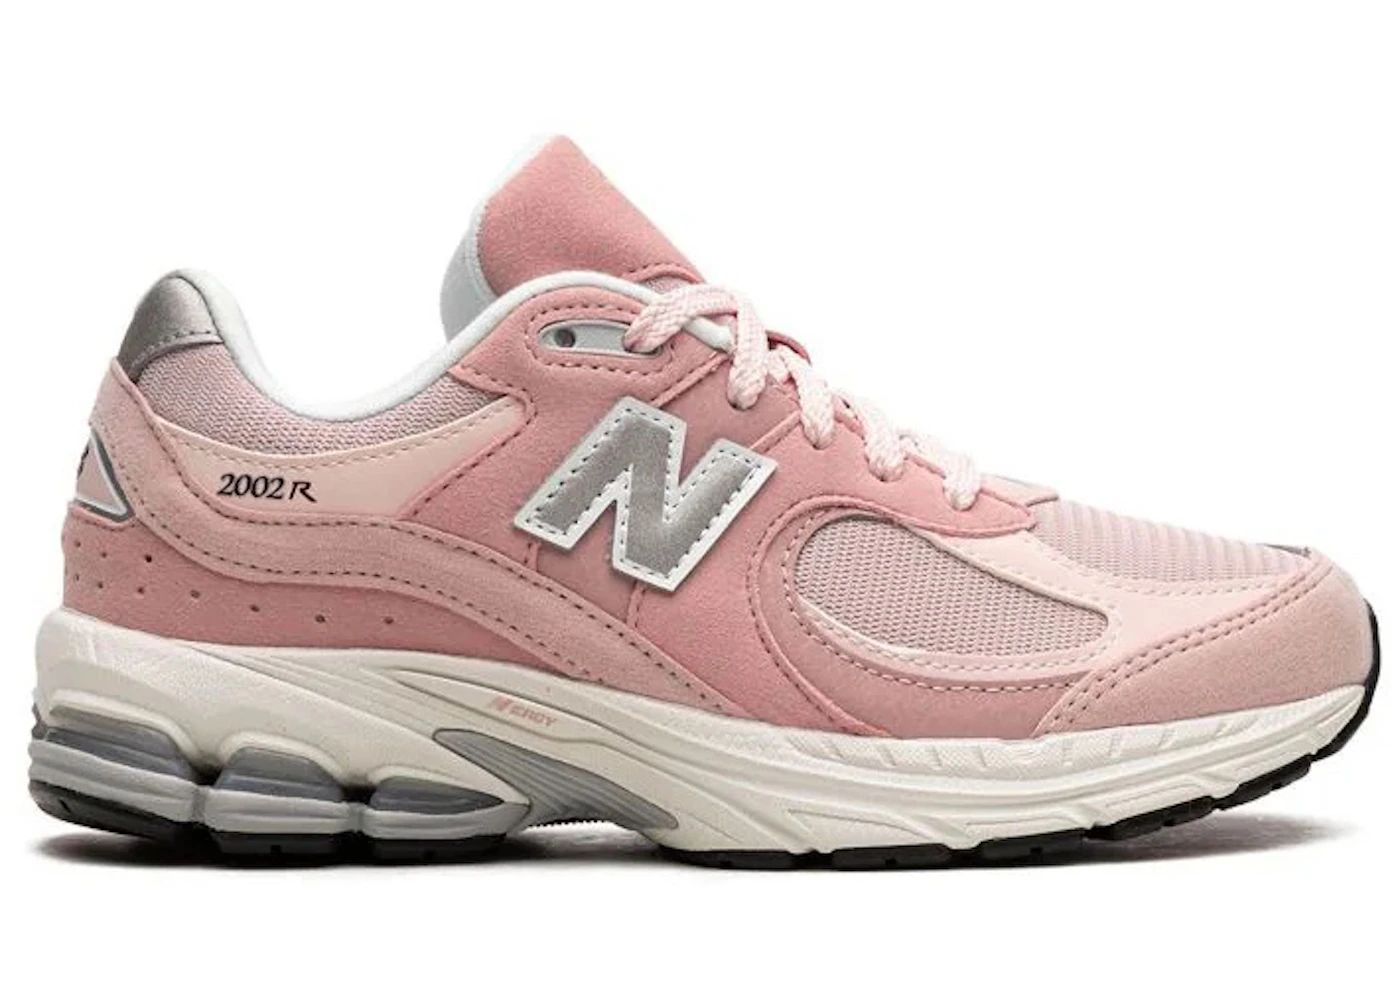 New Balance 2002RPink Sand (PS) | StockX